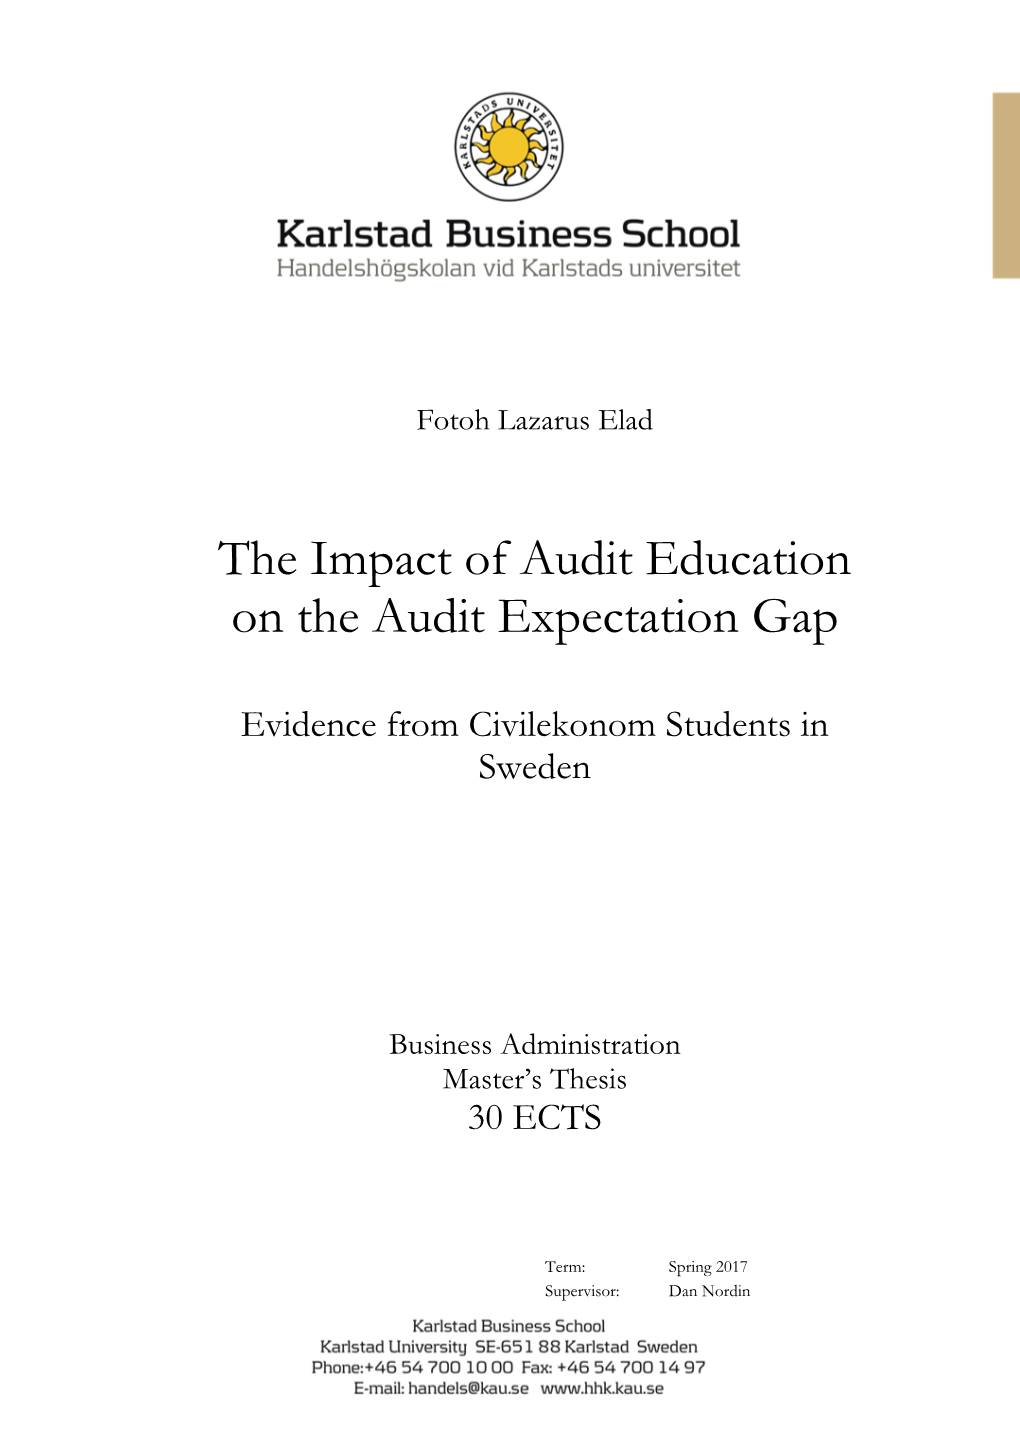 The Impact of Audit Education on the Audit Expectation Gap